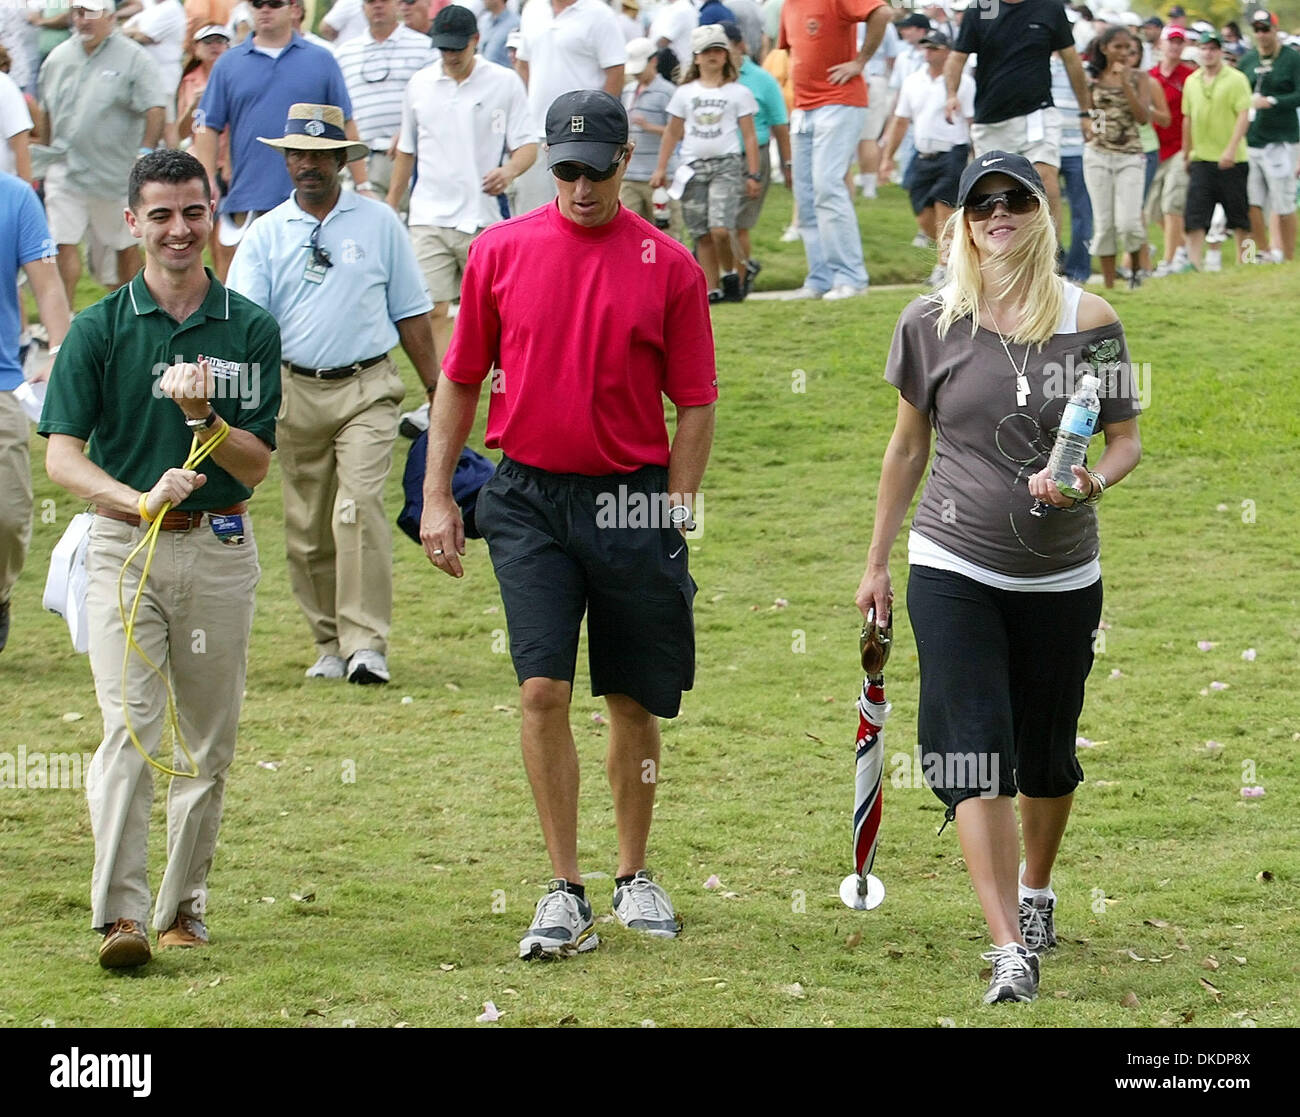 Mar 24, 2007 - Doral, FL, USA - Pregant Tiger Woods' wife ELIN, walks along with unidentified friends between the eight and ninth holes during the third round of the CA Championship Saturday at Doral.   (Credit Image: © Bill Ingram/Palm Beach Post/ZUMA Press) Stock Photo